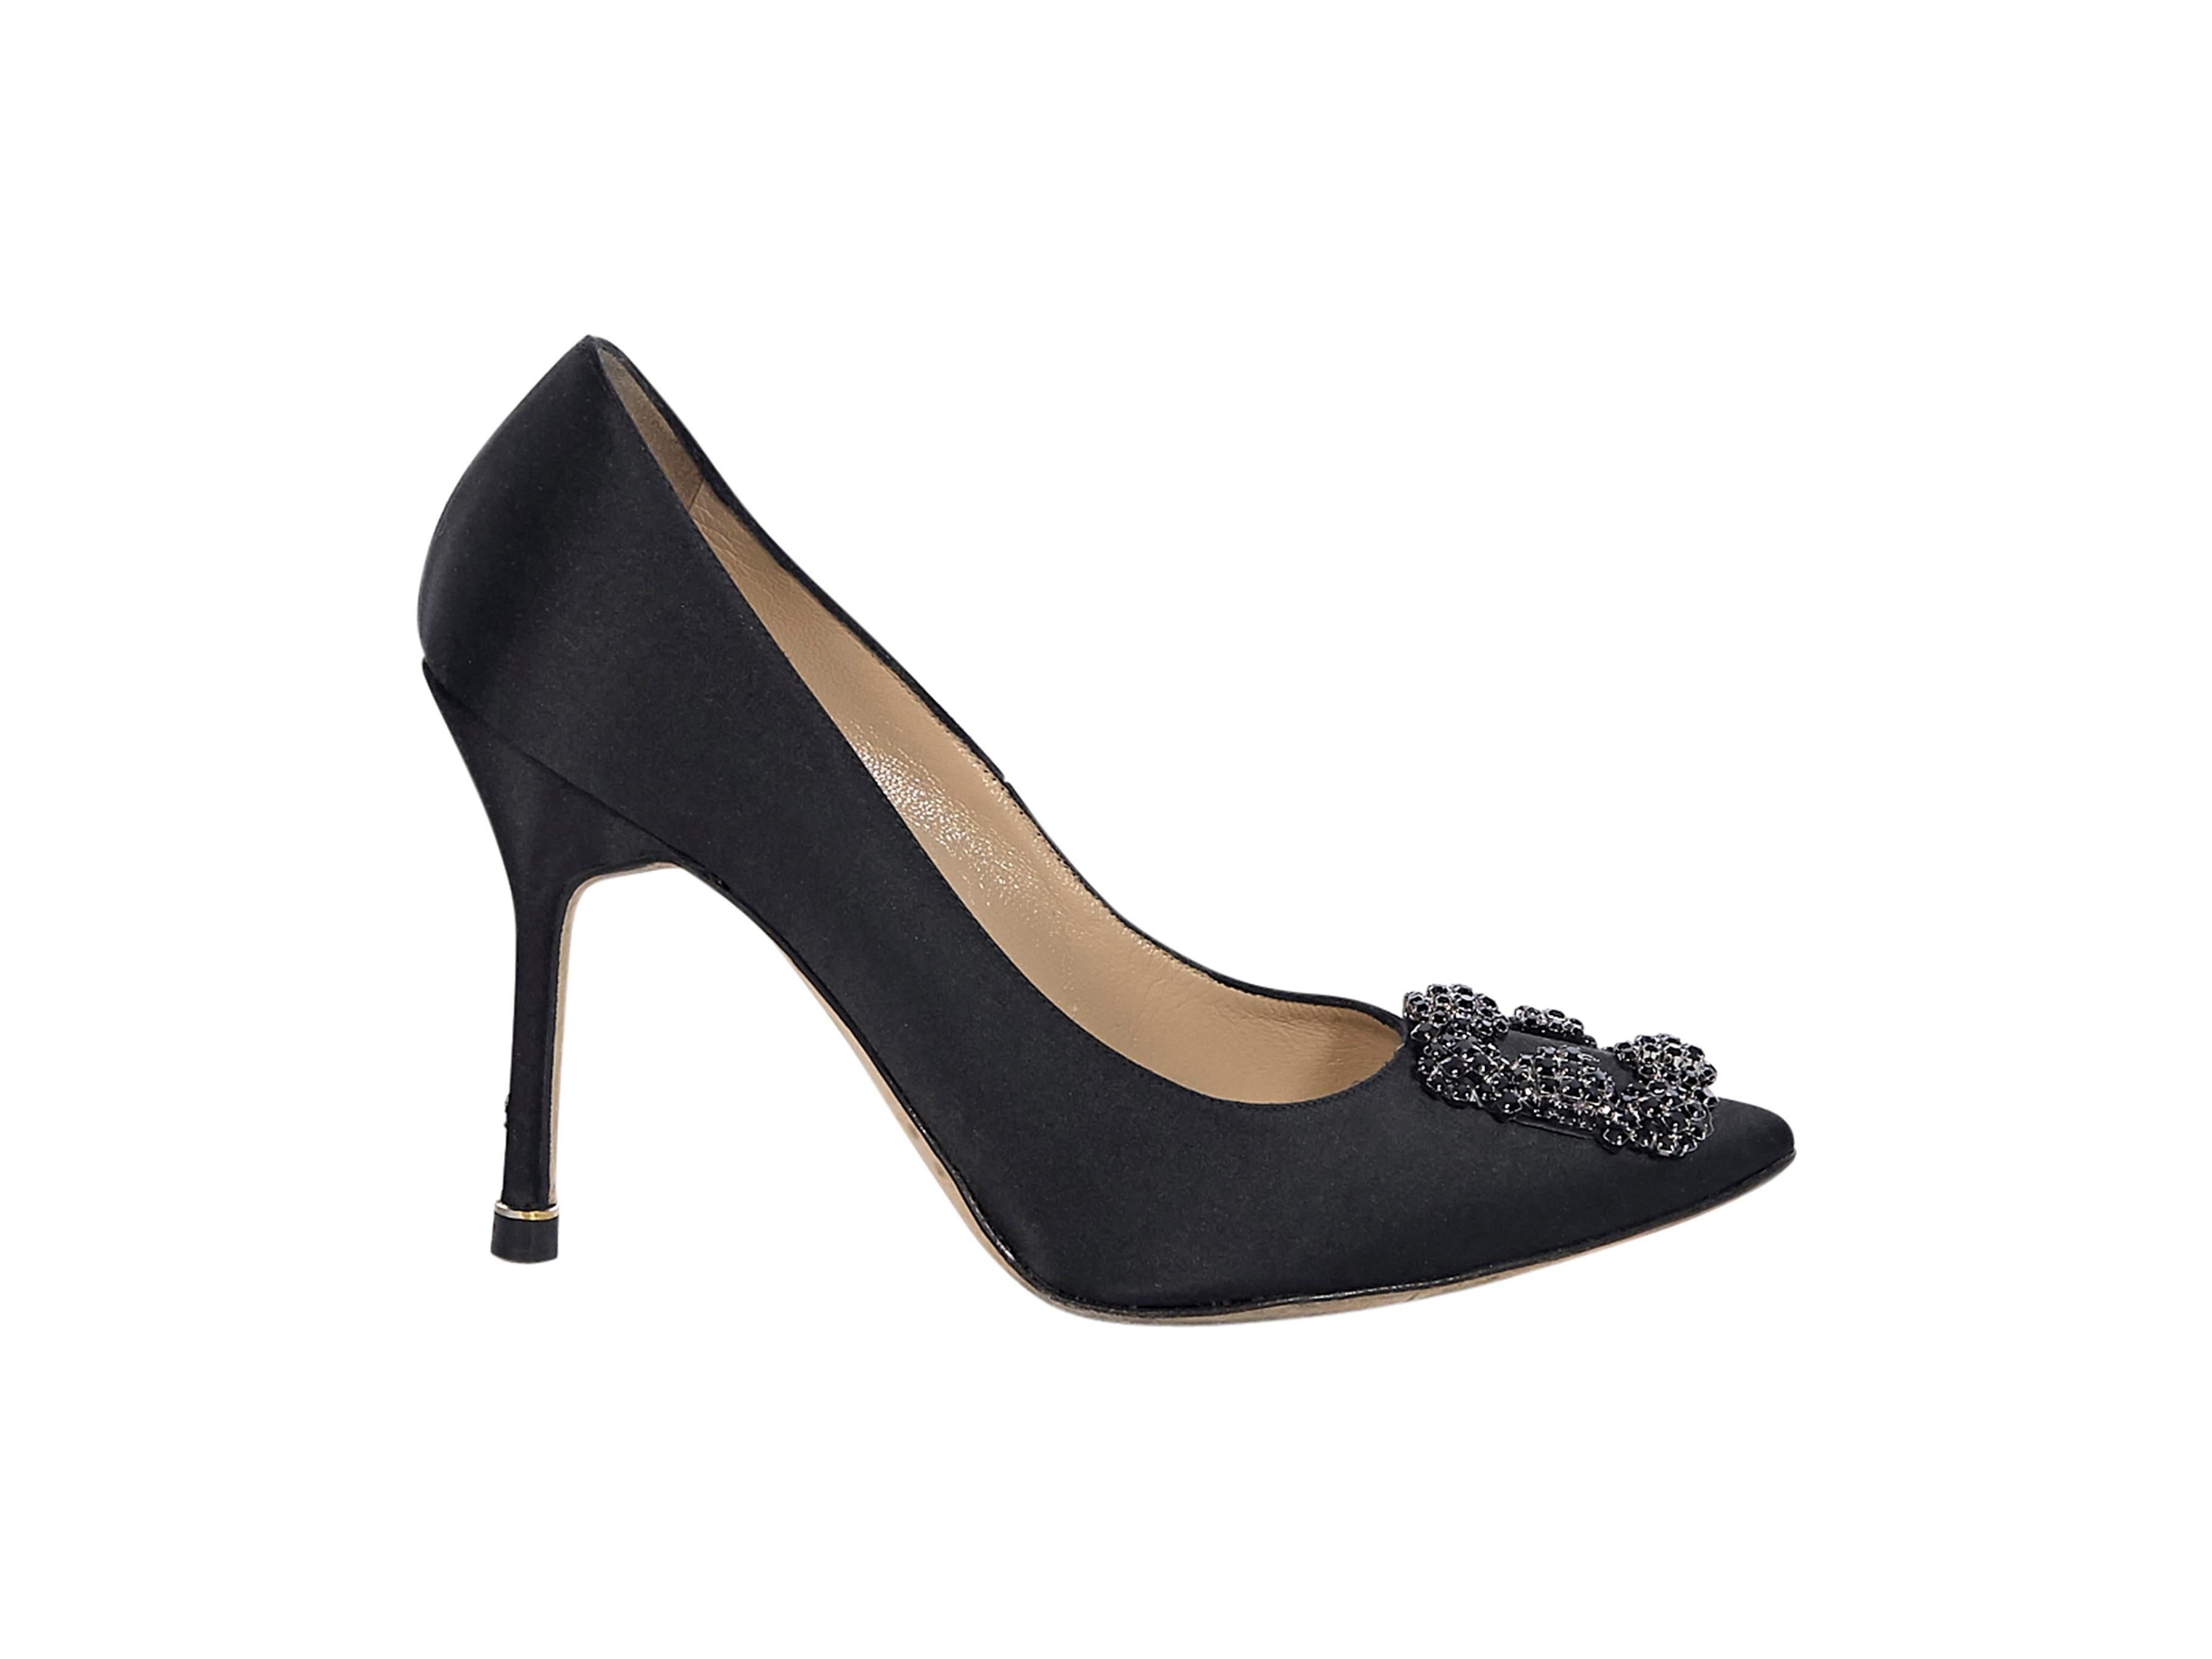 Product details: Black crystal-embellished satin pumps by Manolo Blahnik.  Pointed-toe. Stiletto heel. Slip-on style. Wear with a silk slip dress. Label size IT 38. 4